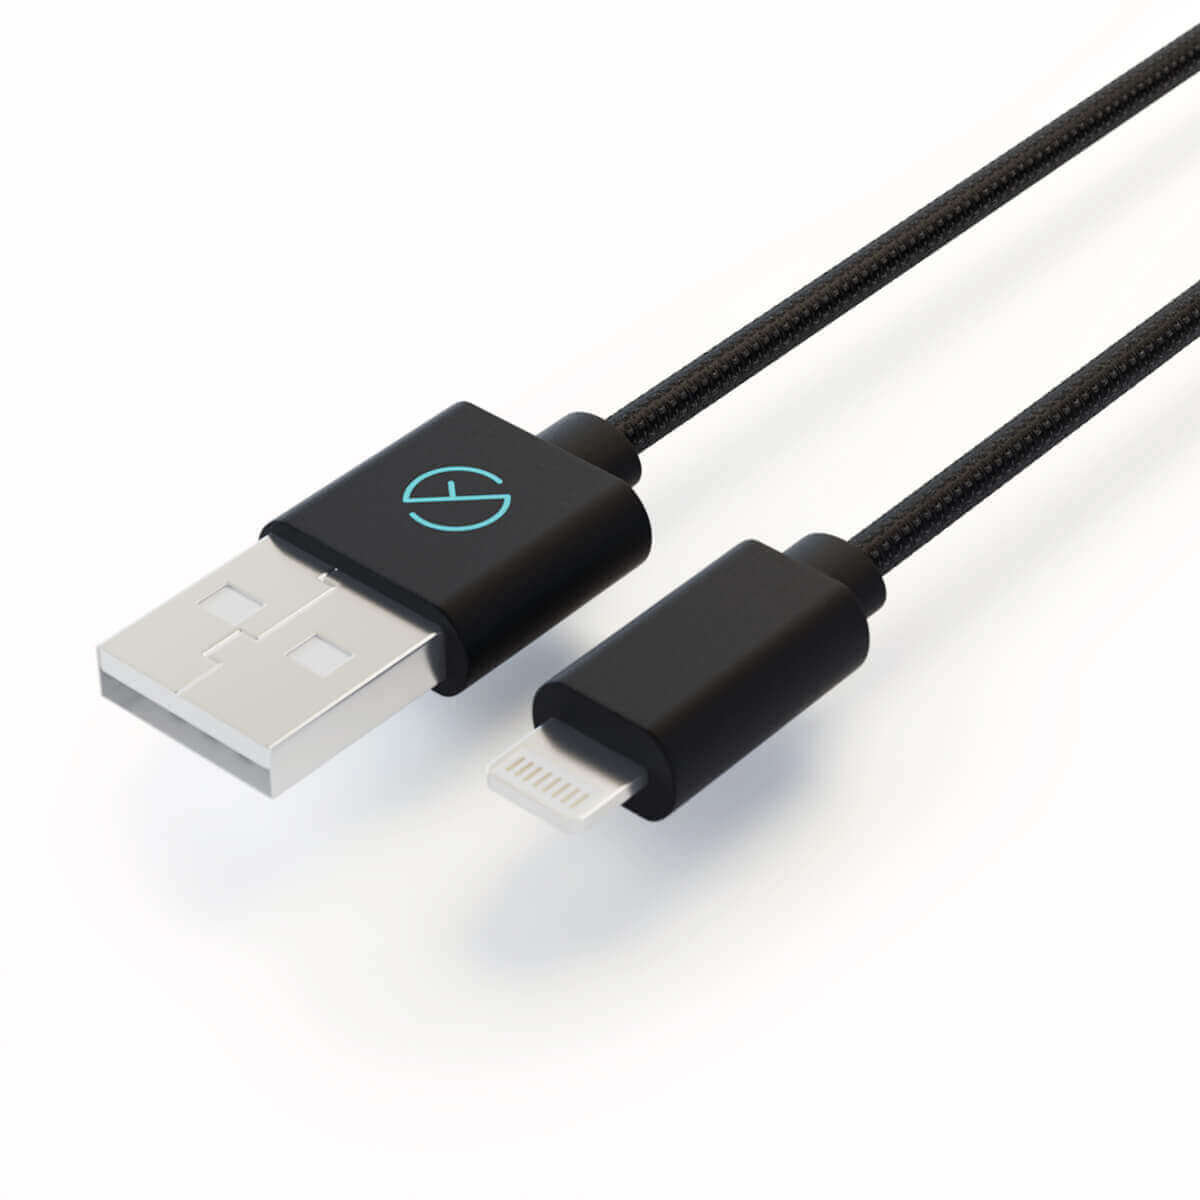 JuiceBack: Data Blocking Charging Cable for iPhones and iPads